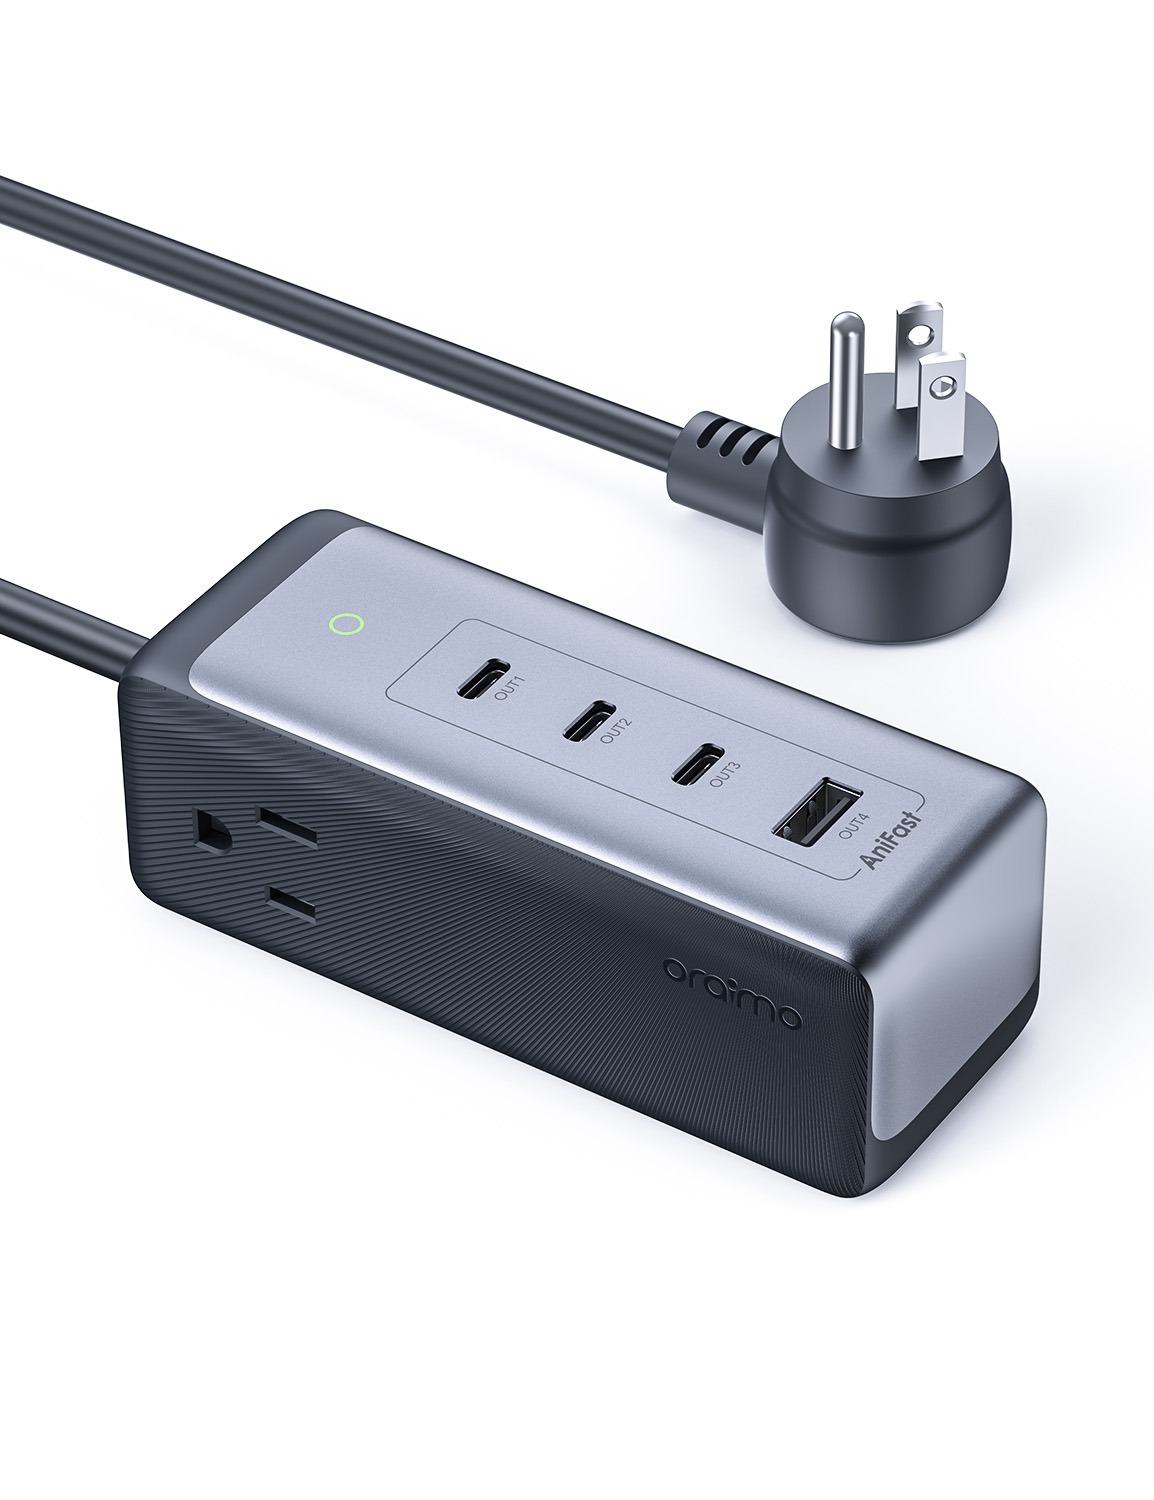 Oraimo 120W HyperGaN Charging Station 6-IN-1 Power Strip $40.49 + Free Shipping